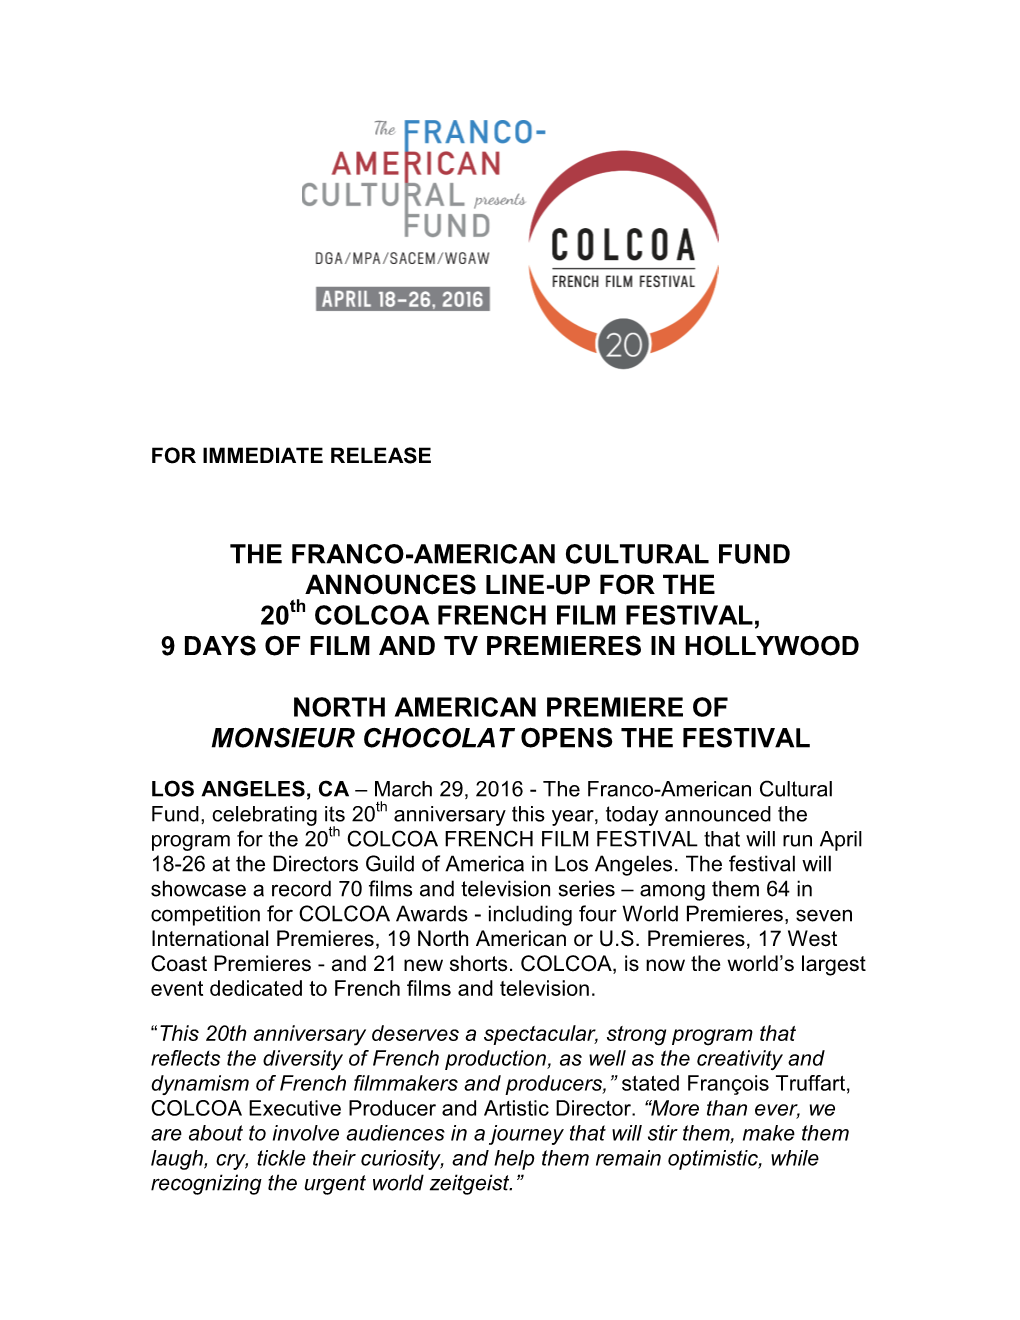 THE FRANCO-AMERICAN CULTURAL FUND ANNOUNCES LINE-UP for the 20Th COLCOA FRENCH FILM FESTIVAL, 9 DAYS of FILM and TV PREMIERES in HOLLYWOOD